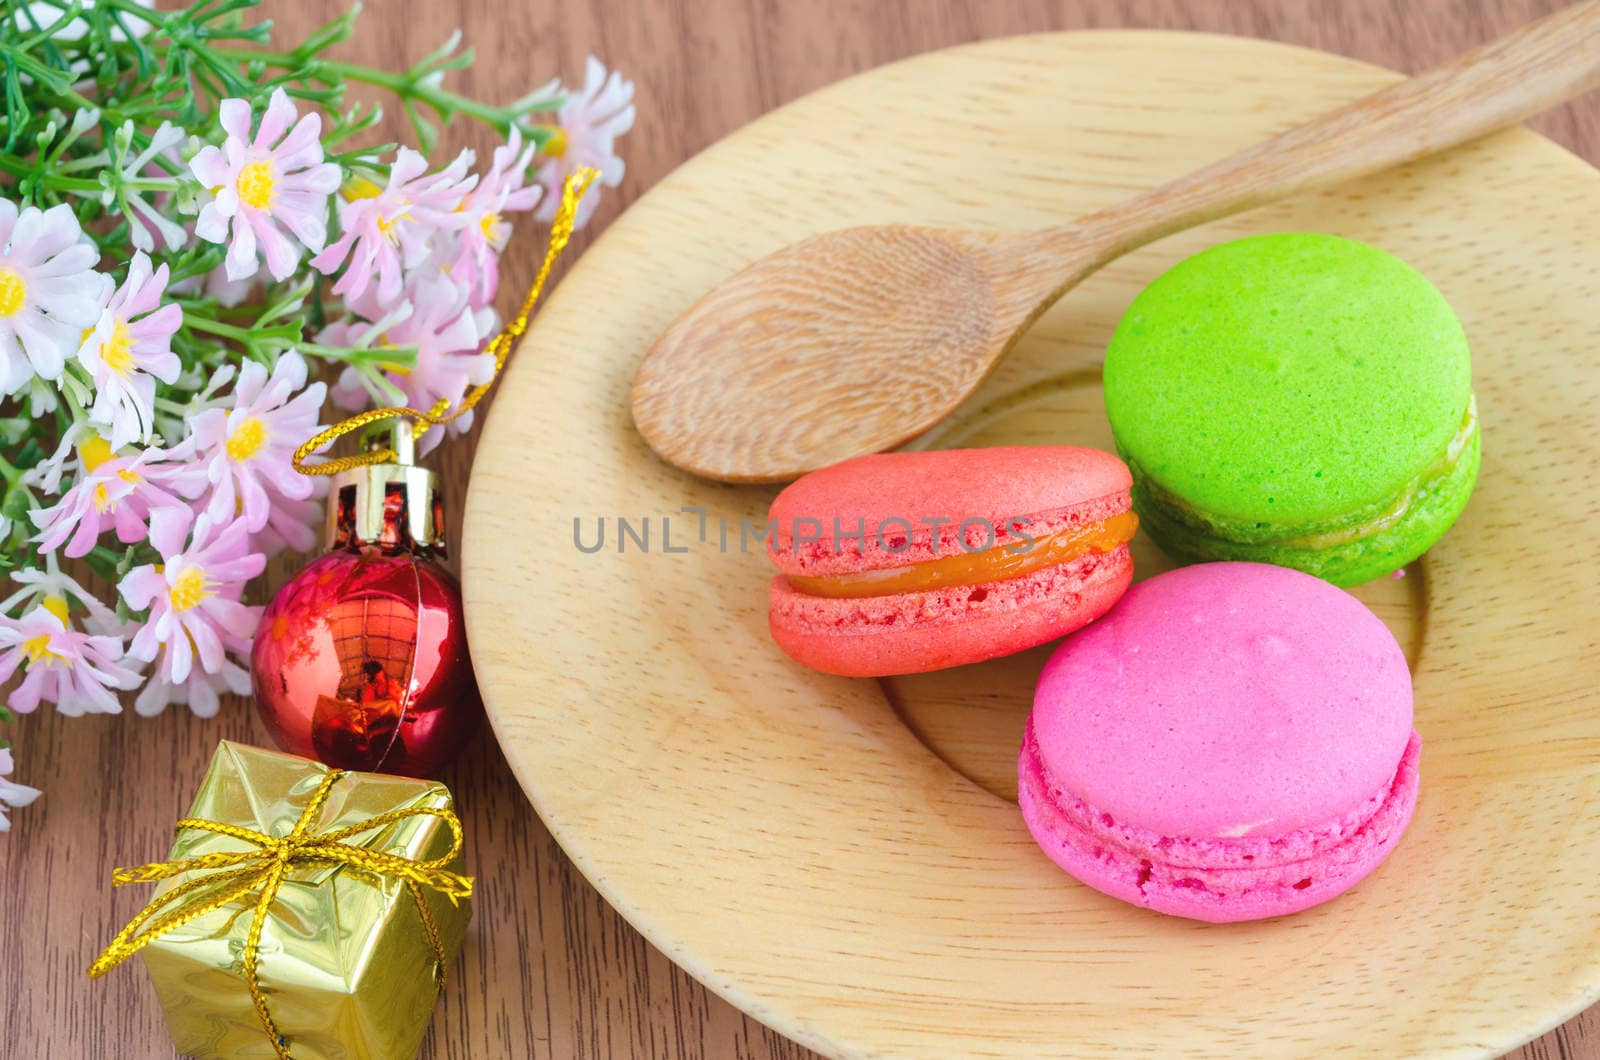 Colorful macaroons. by Gamjai